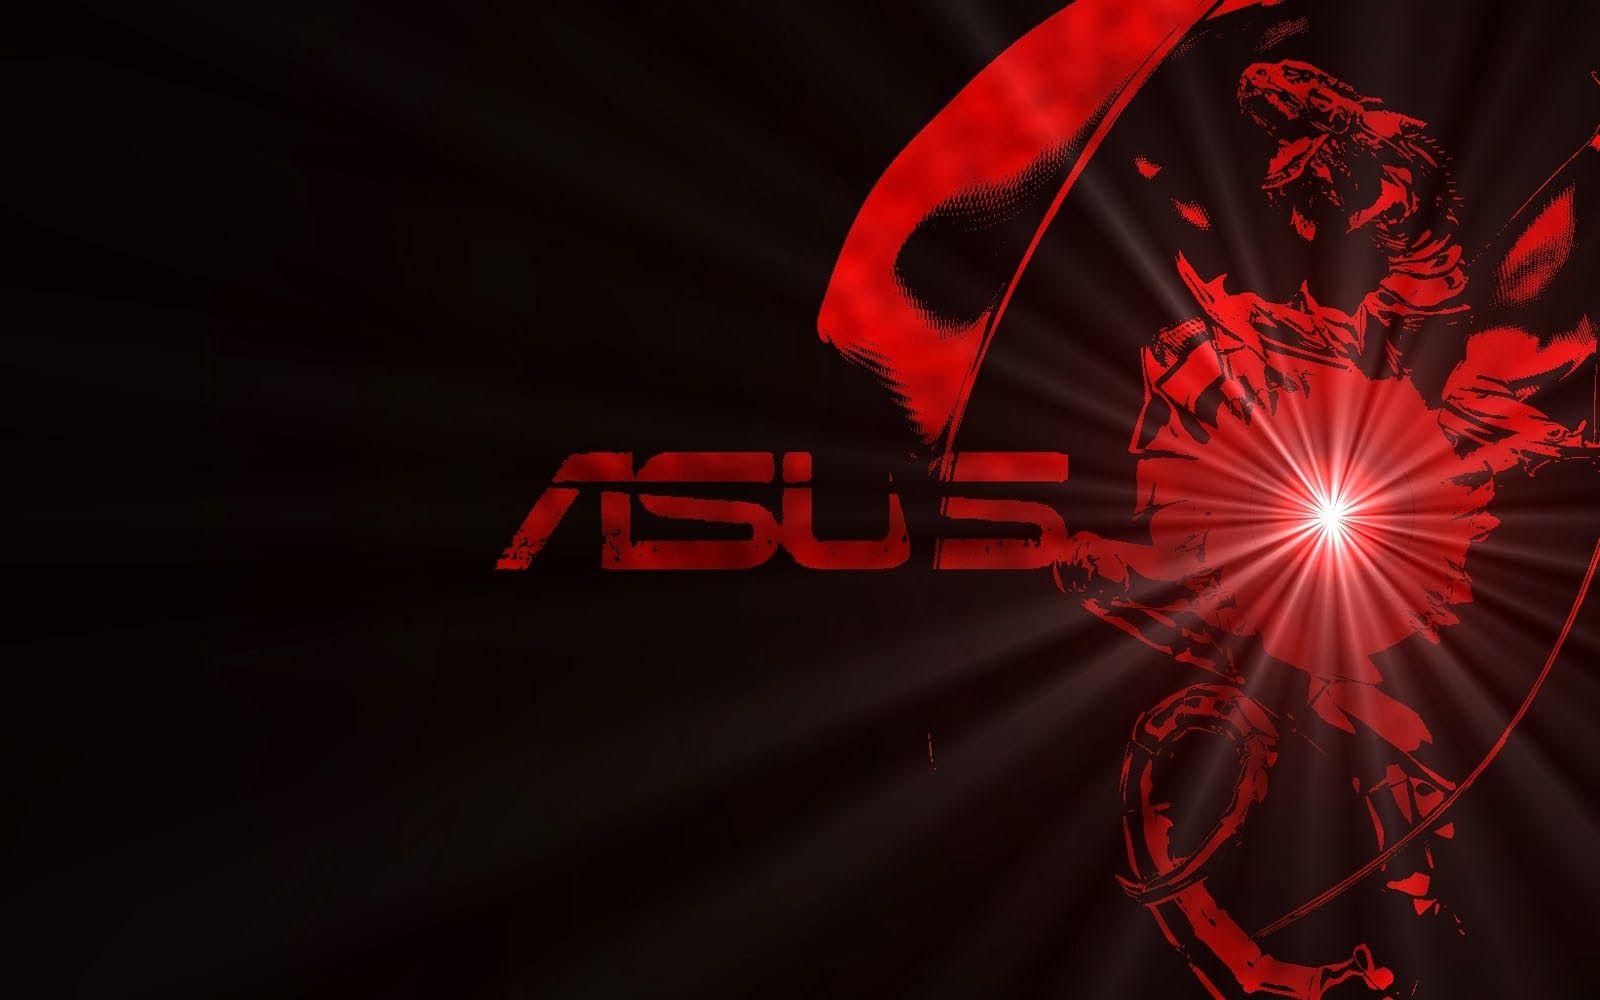 Asus HD Wallpaper for iPhone. Free Style Wallpaper